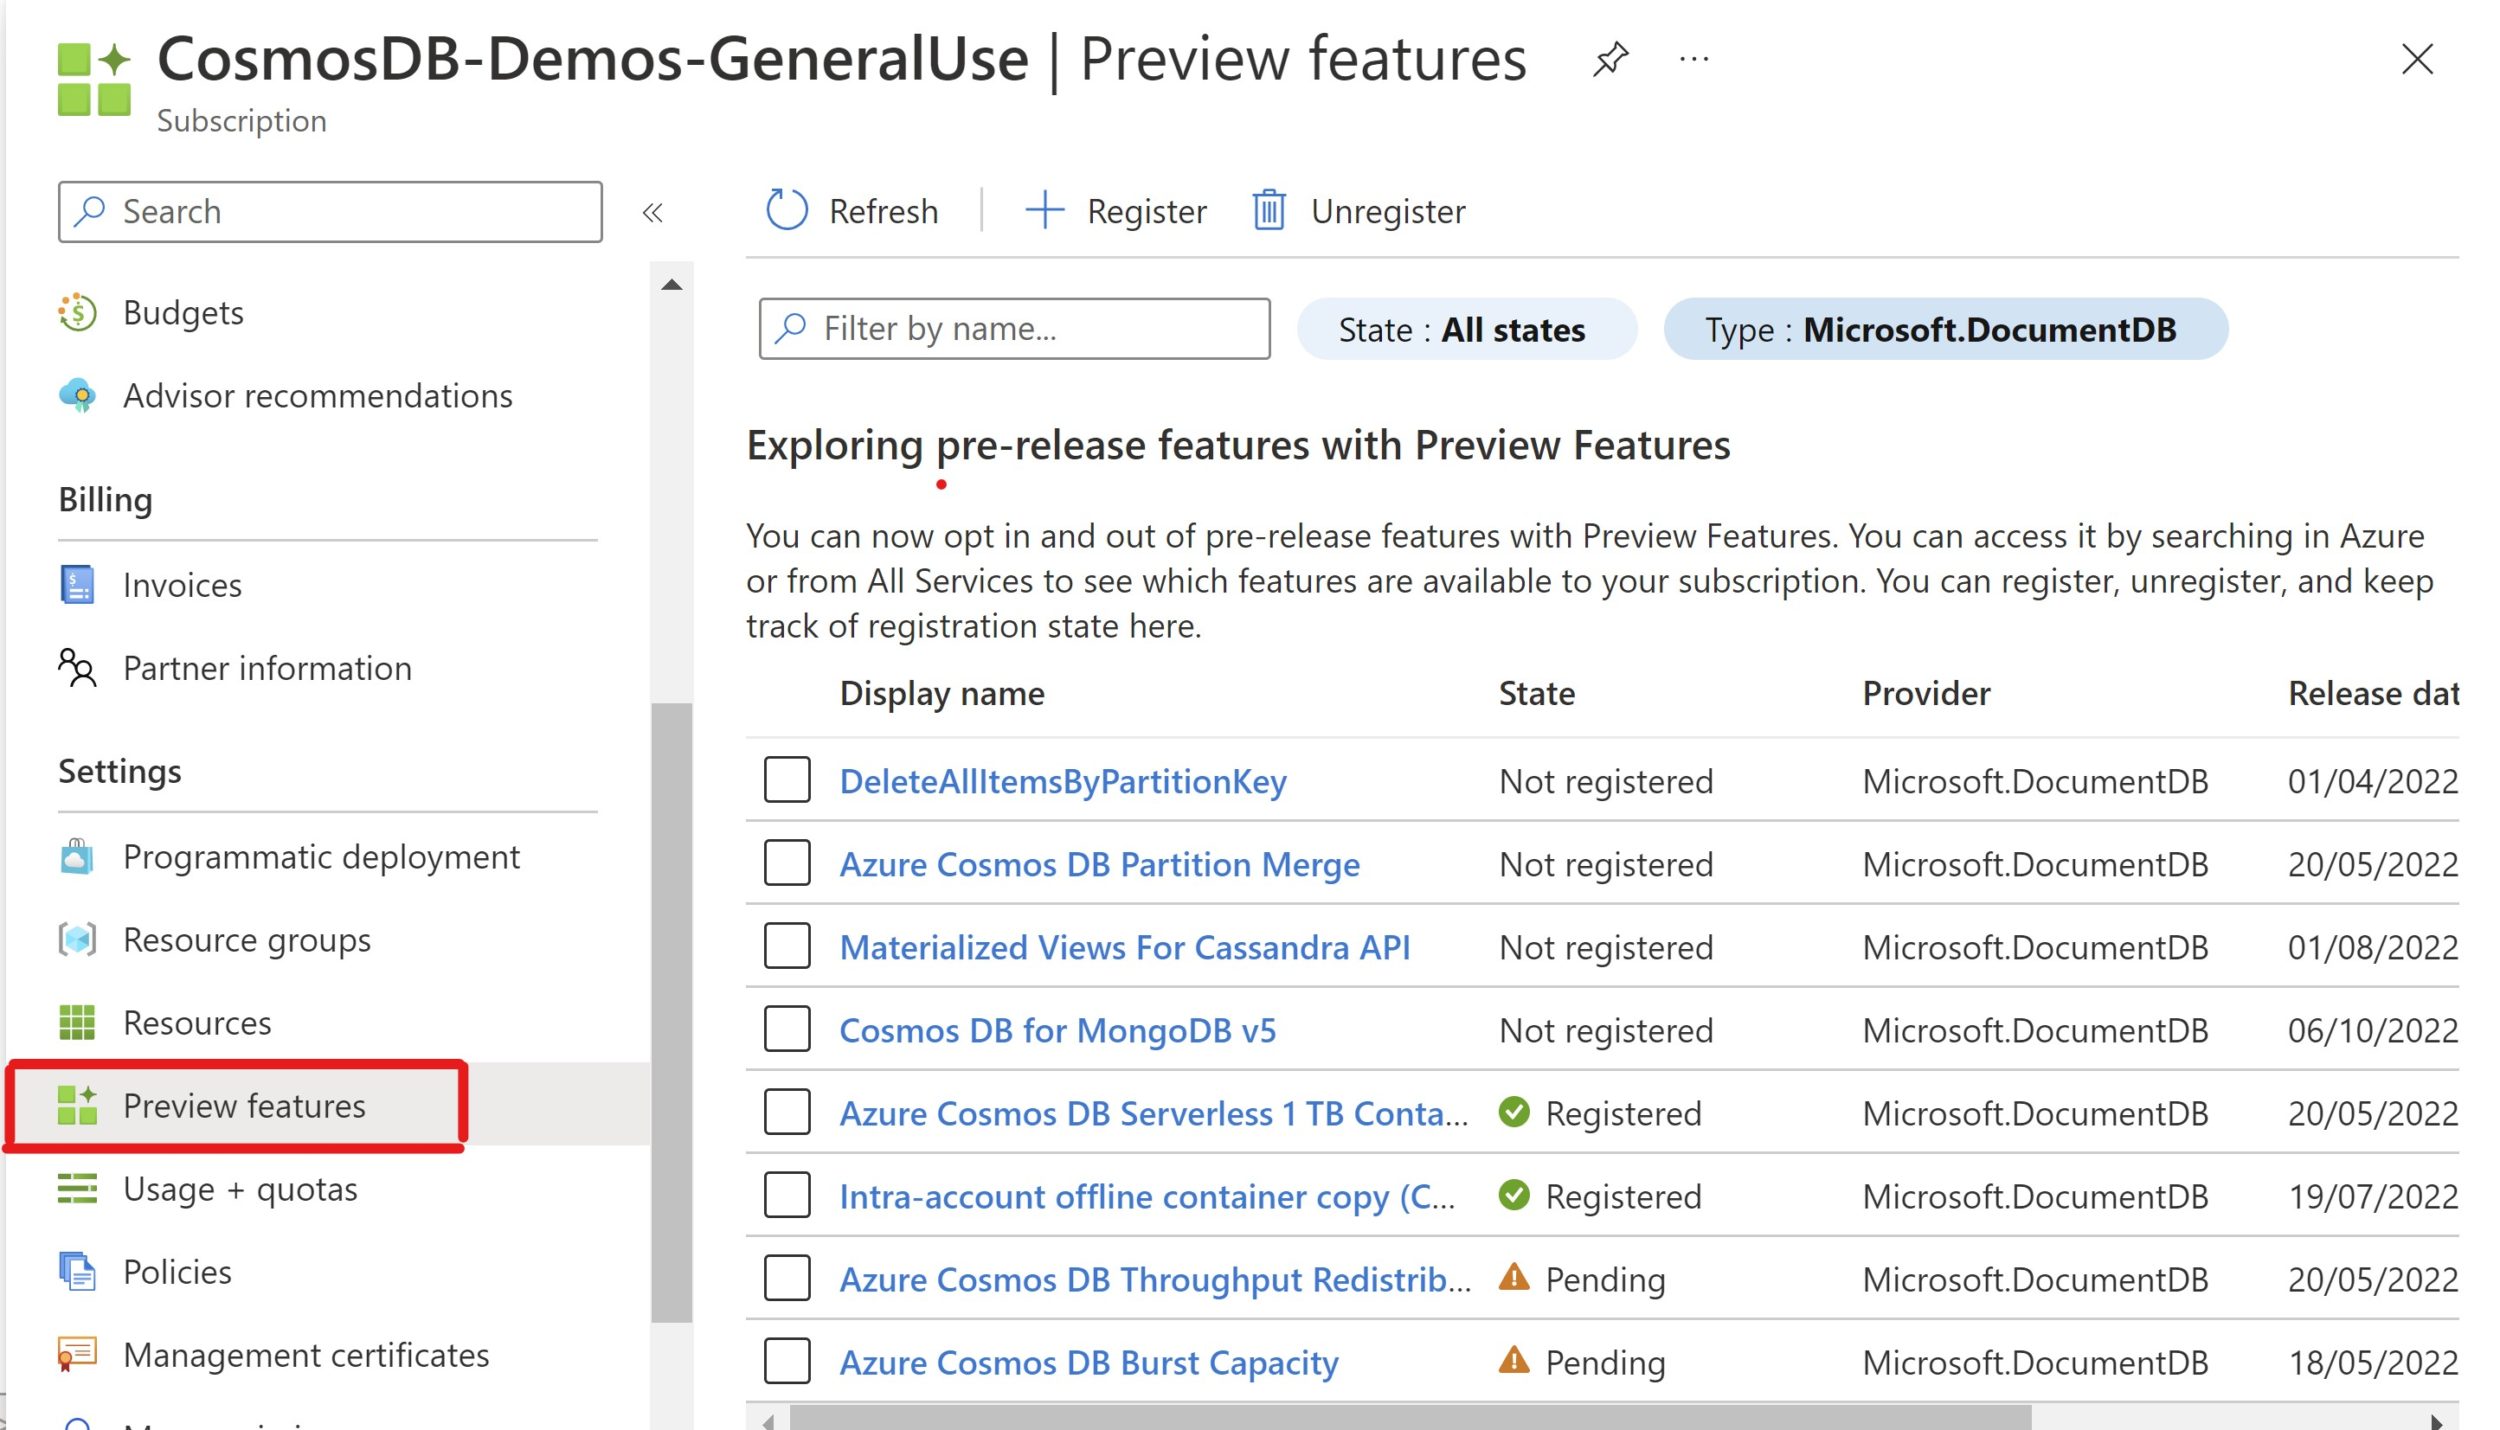 Azure Cosmos DB for MongoDB v5 now in limited preview!